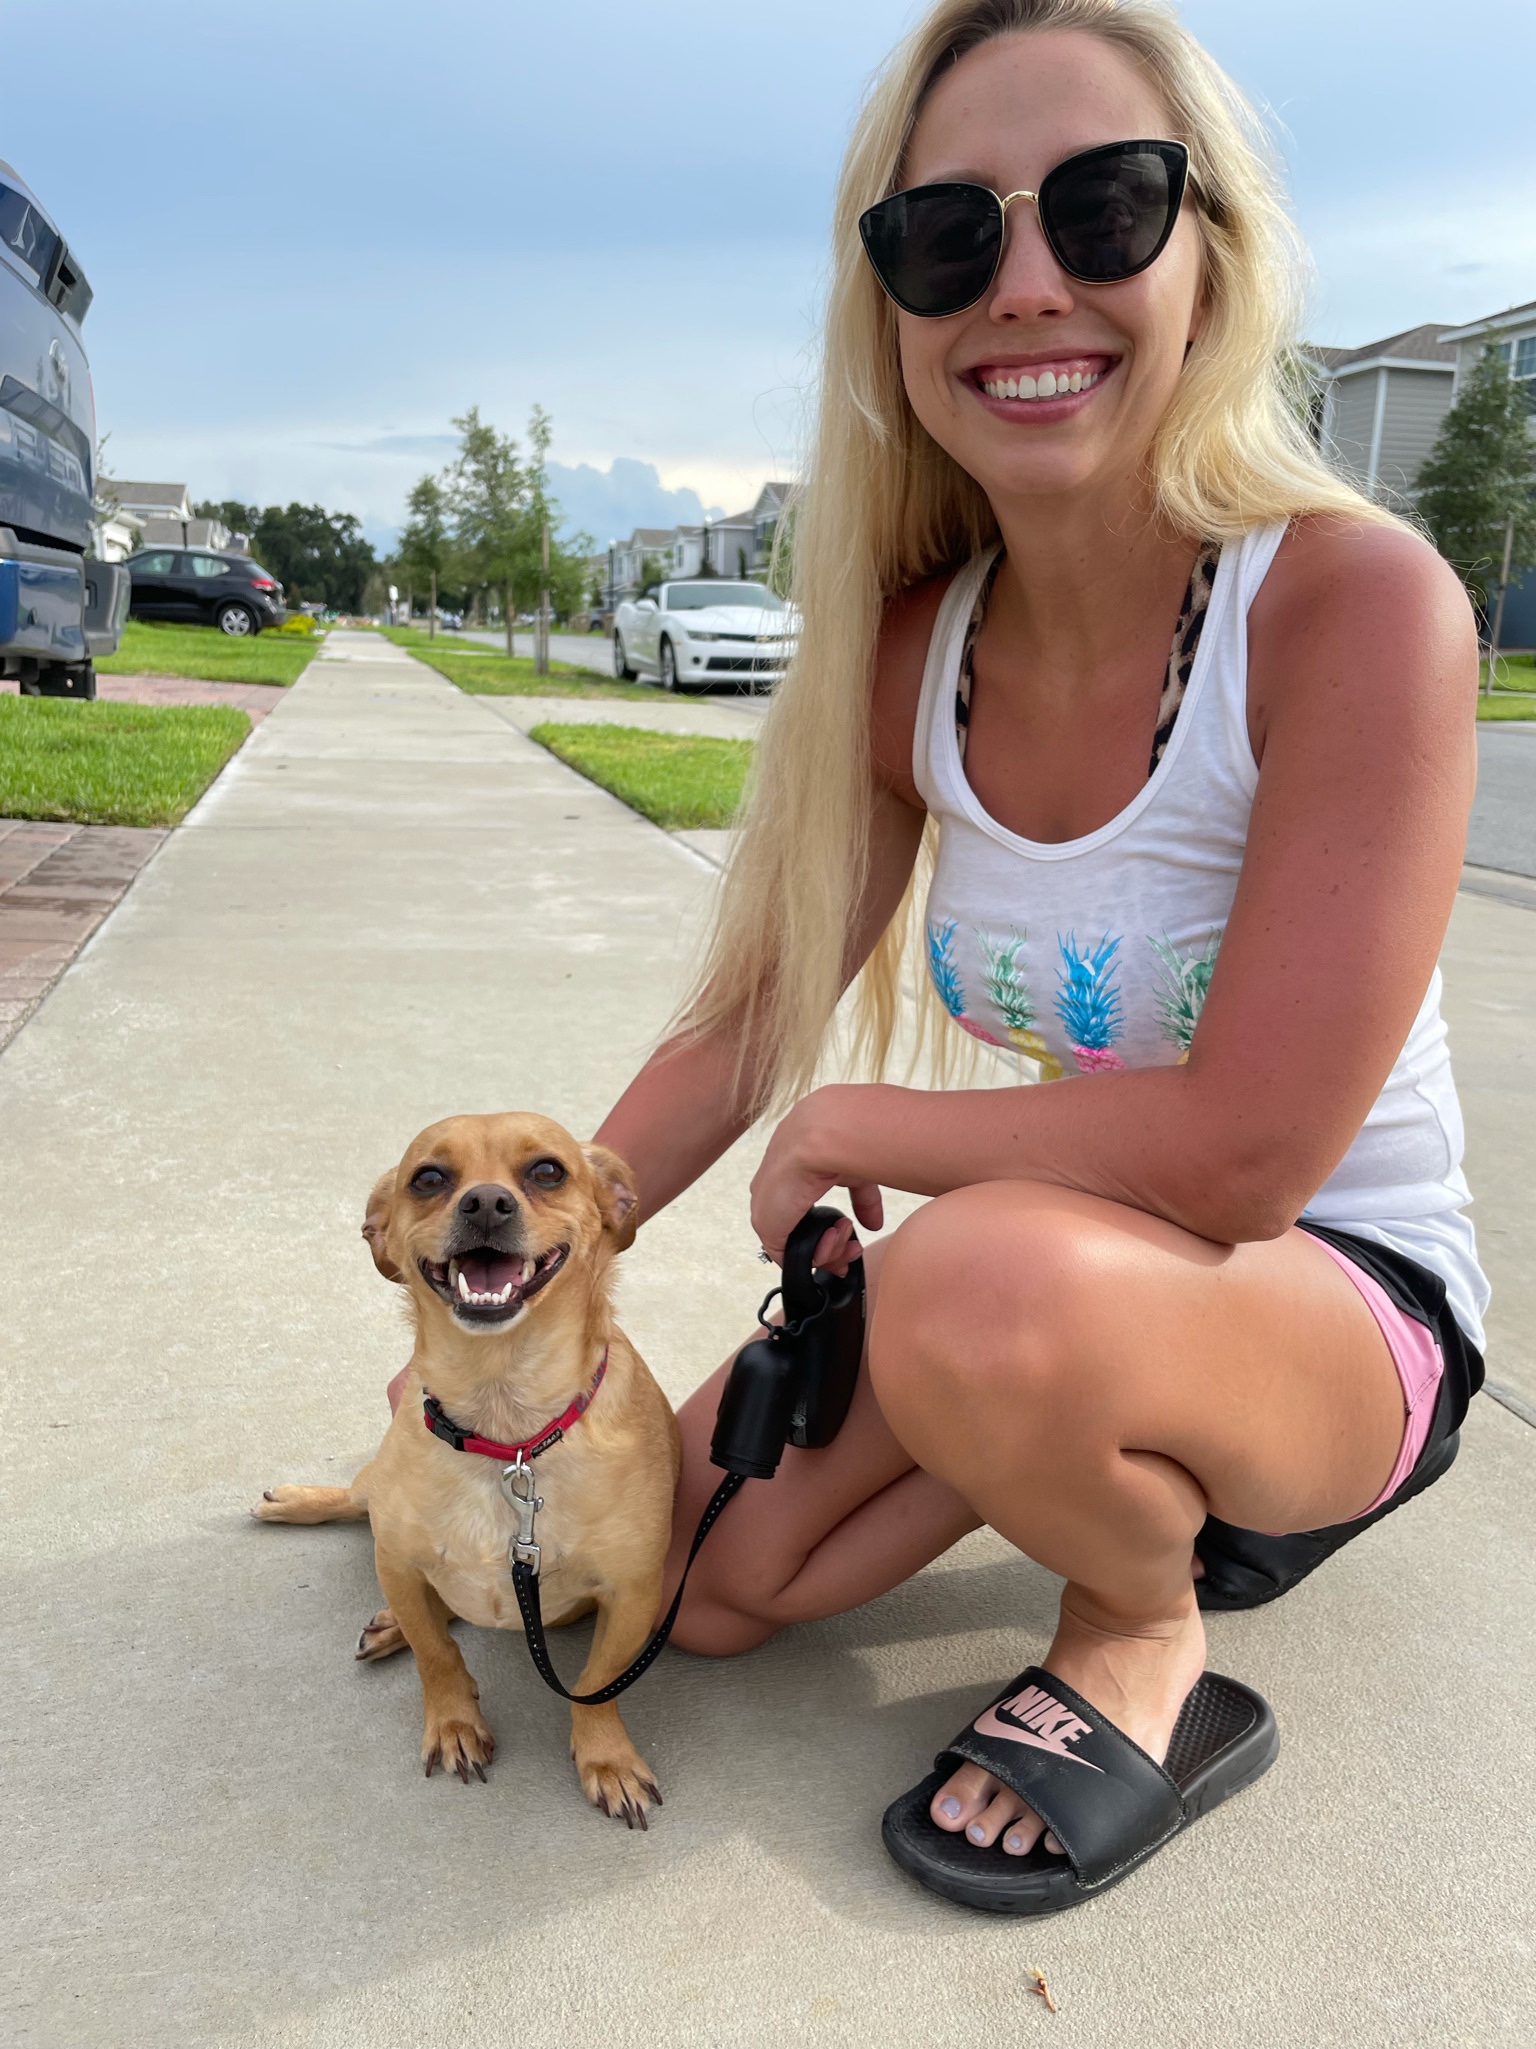 Smiling woman with shades and dog on a leash